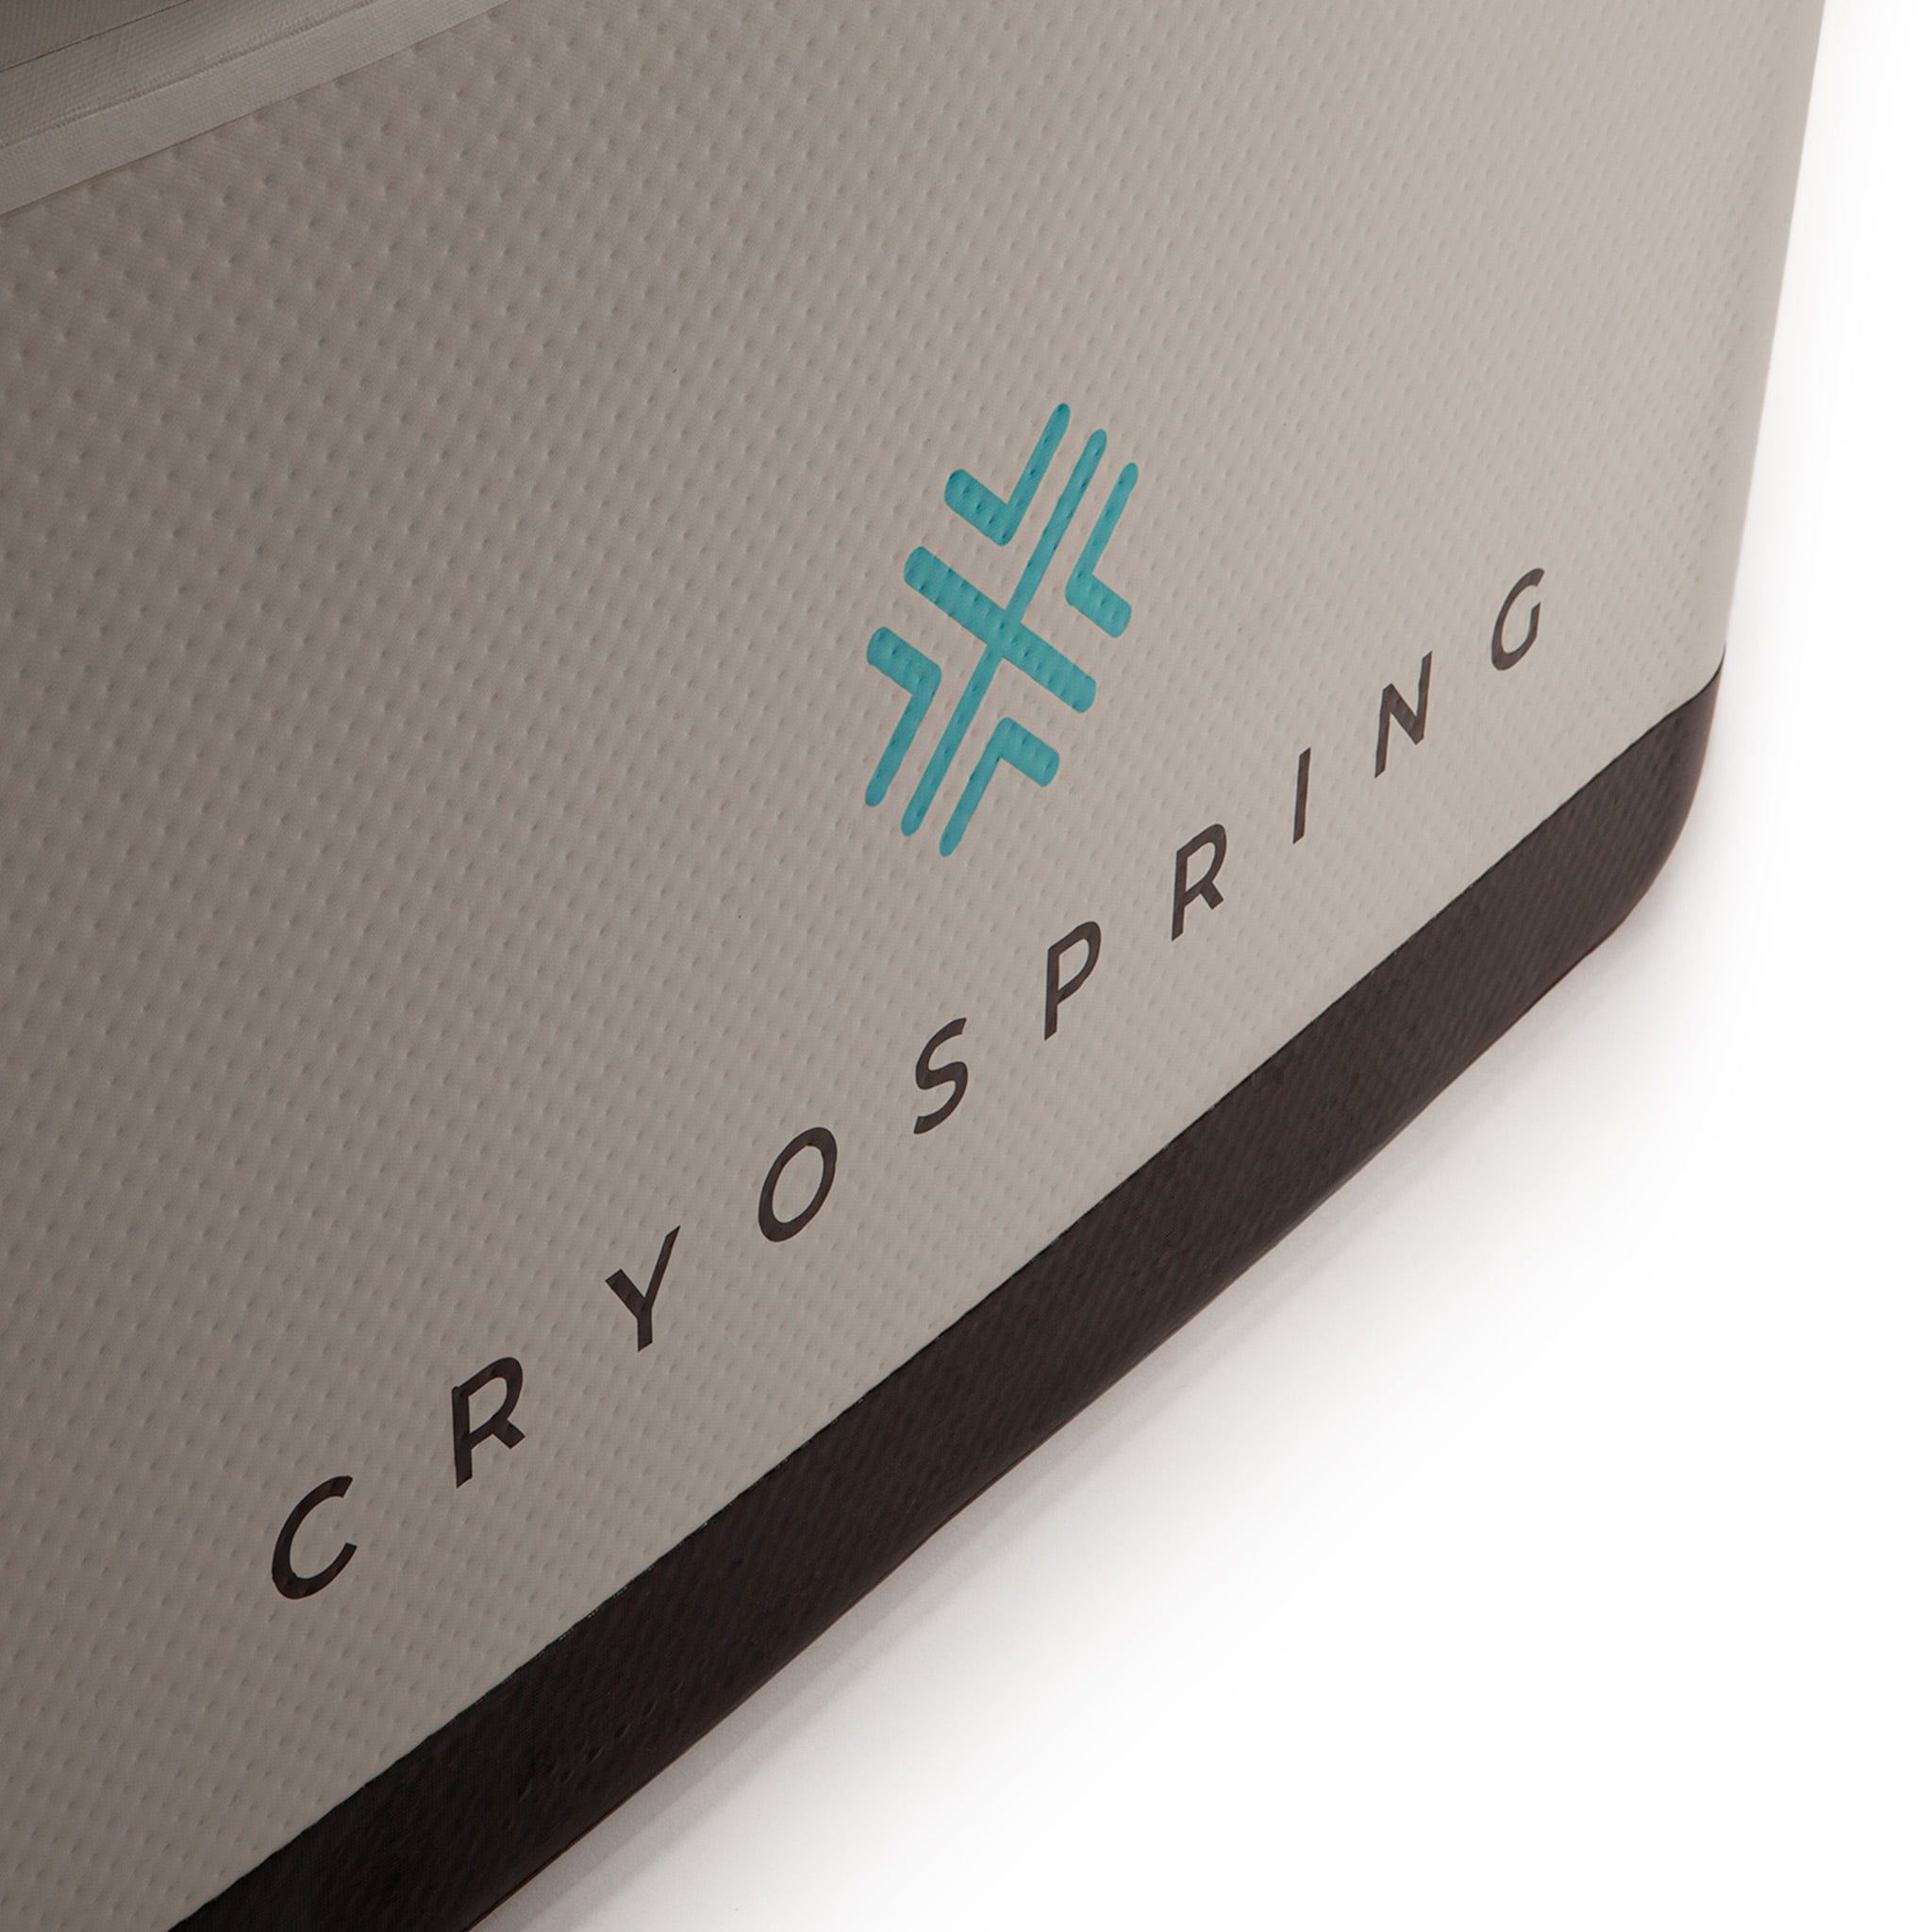 Cryospring Cold Plunge - The Cold Plunge Store